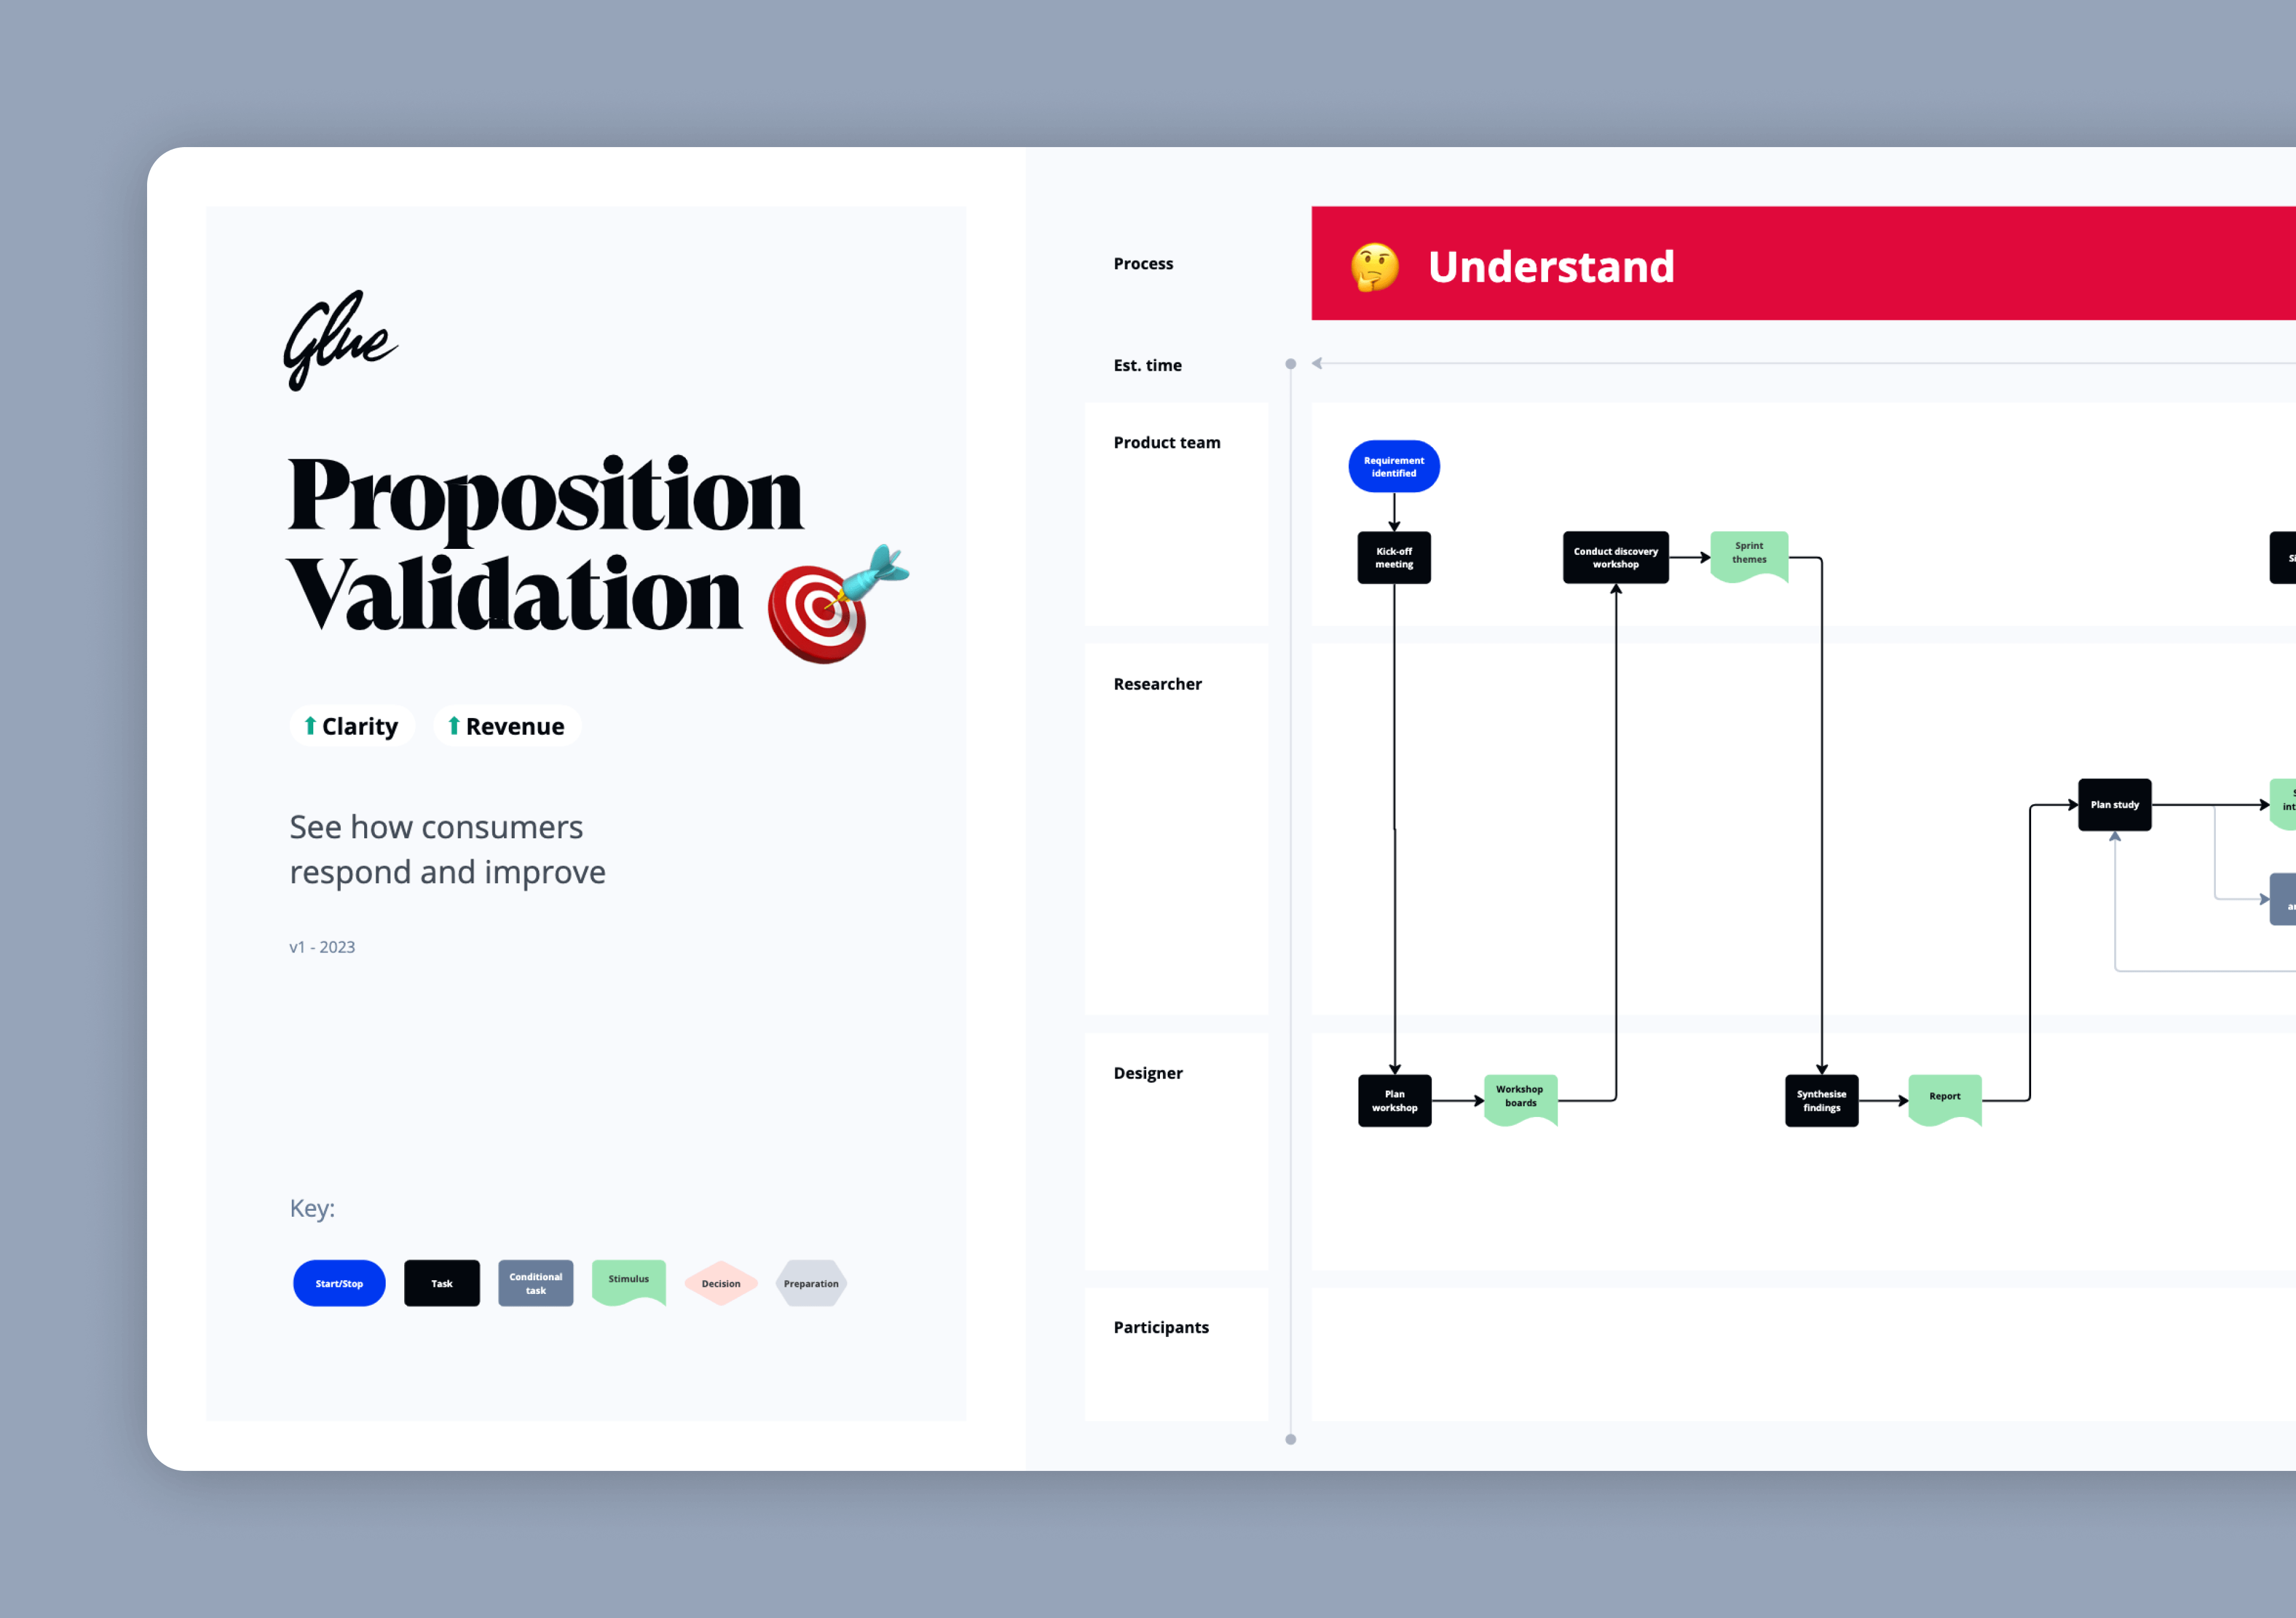 Visualisation of the Glue Product Vision Proposition Validation framework workflow followed by the Glue design, strategy and research team to deliver high-end client projects